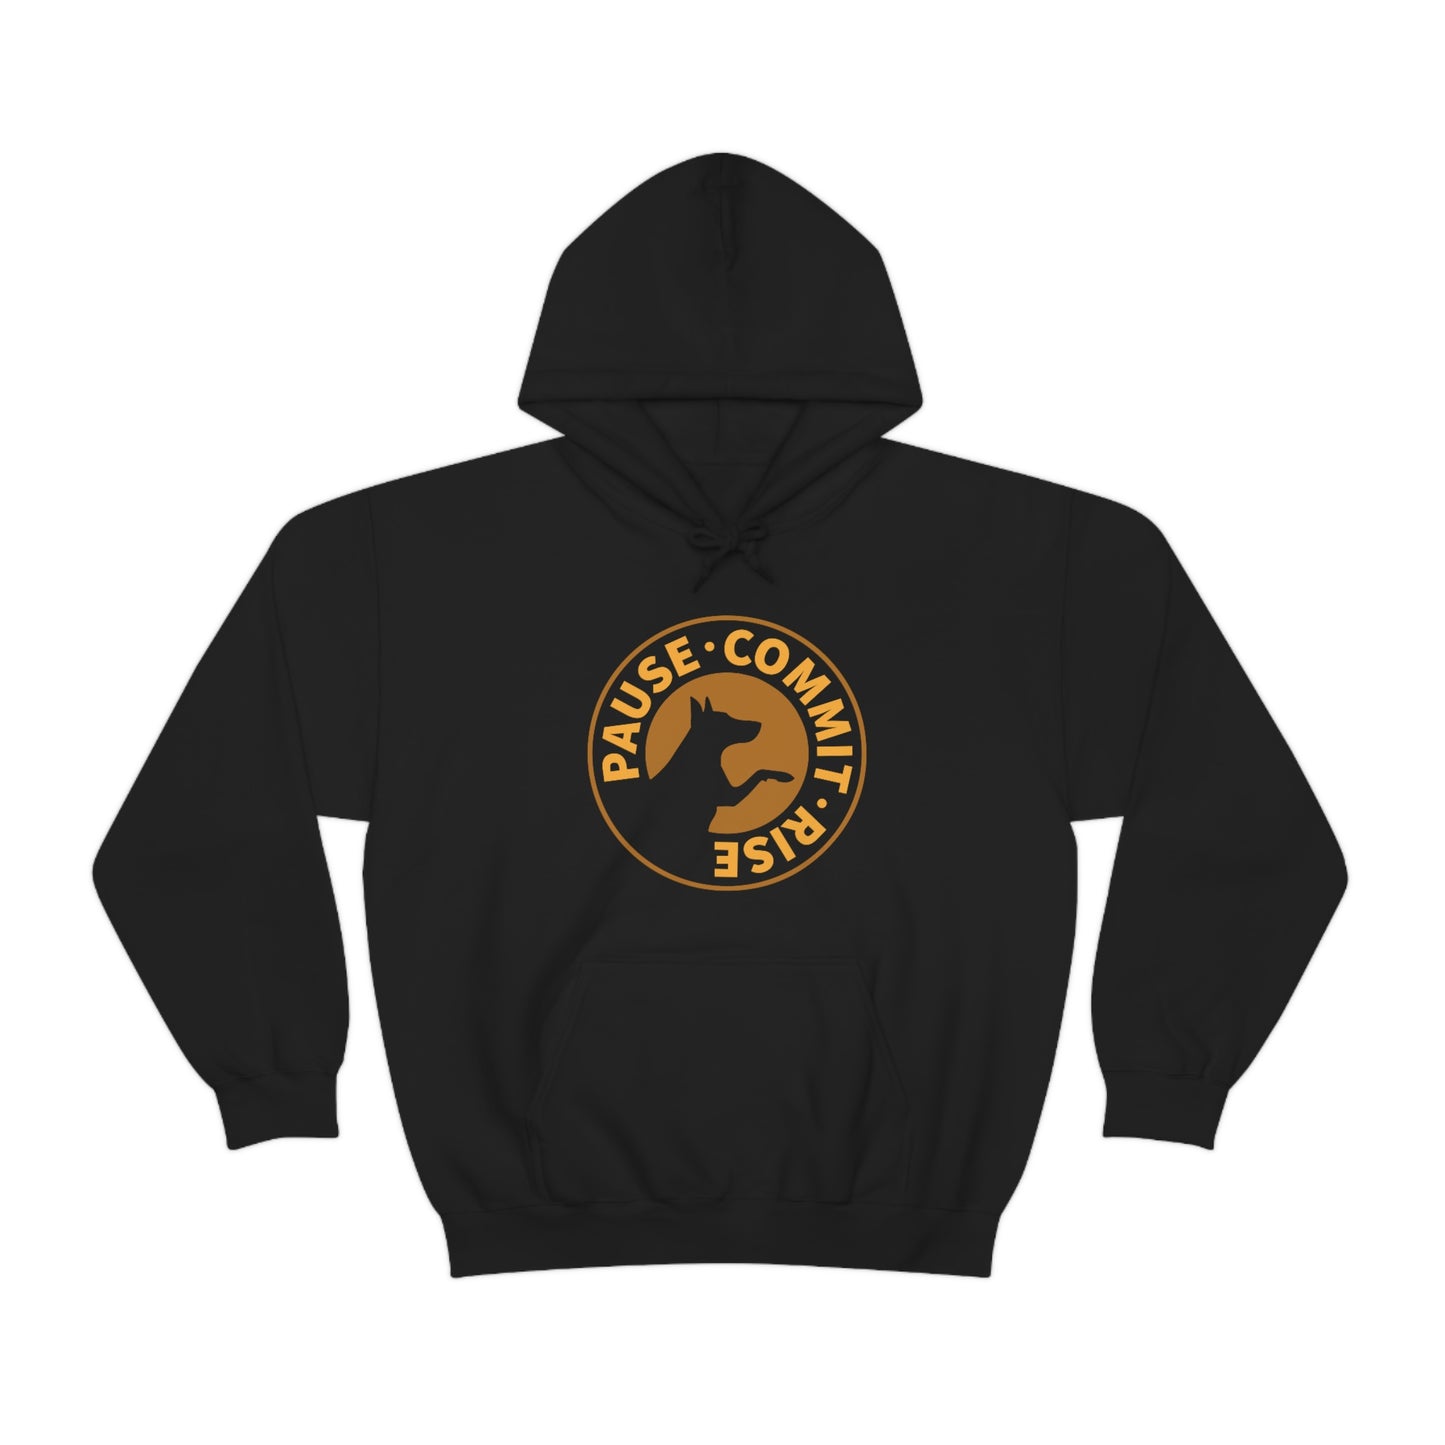 Pause Commit Rise Official Advanced Performance Unisex Heavy Blend™ Hooded Sweatshirt